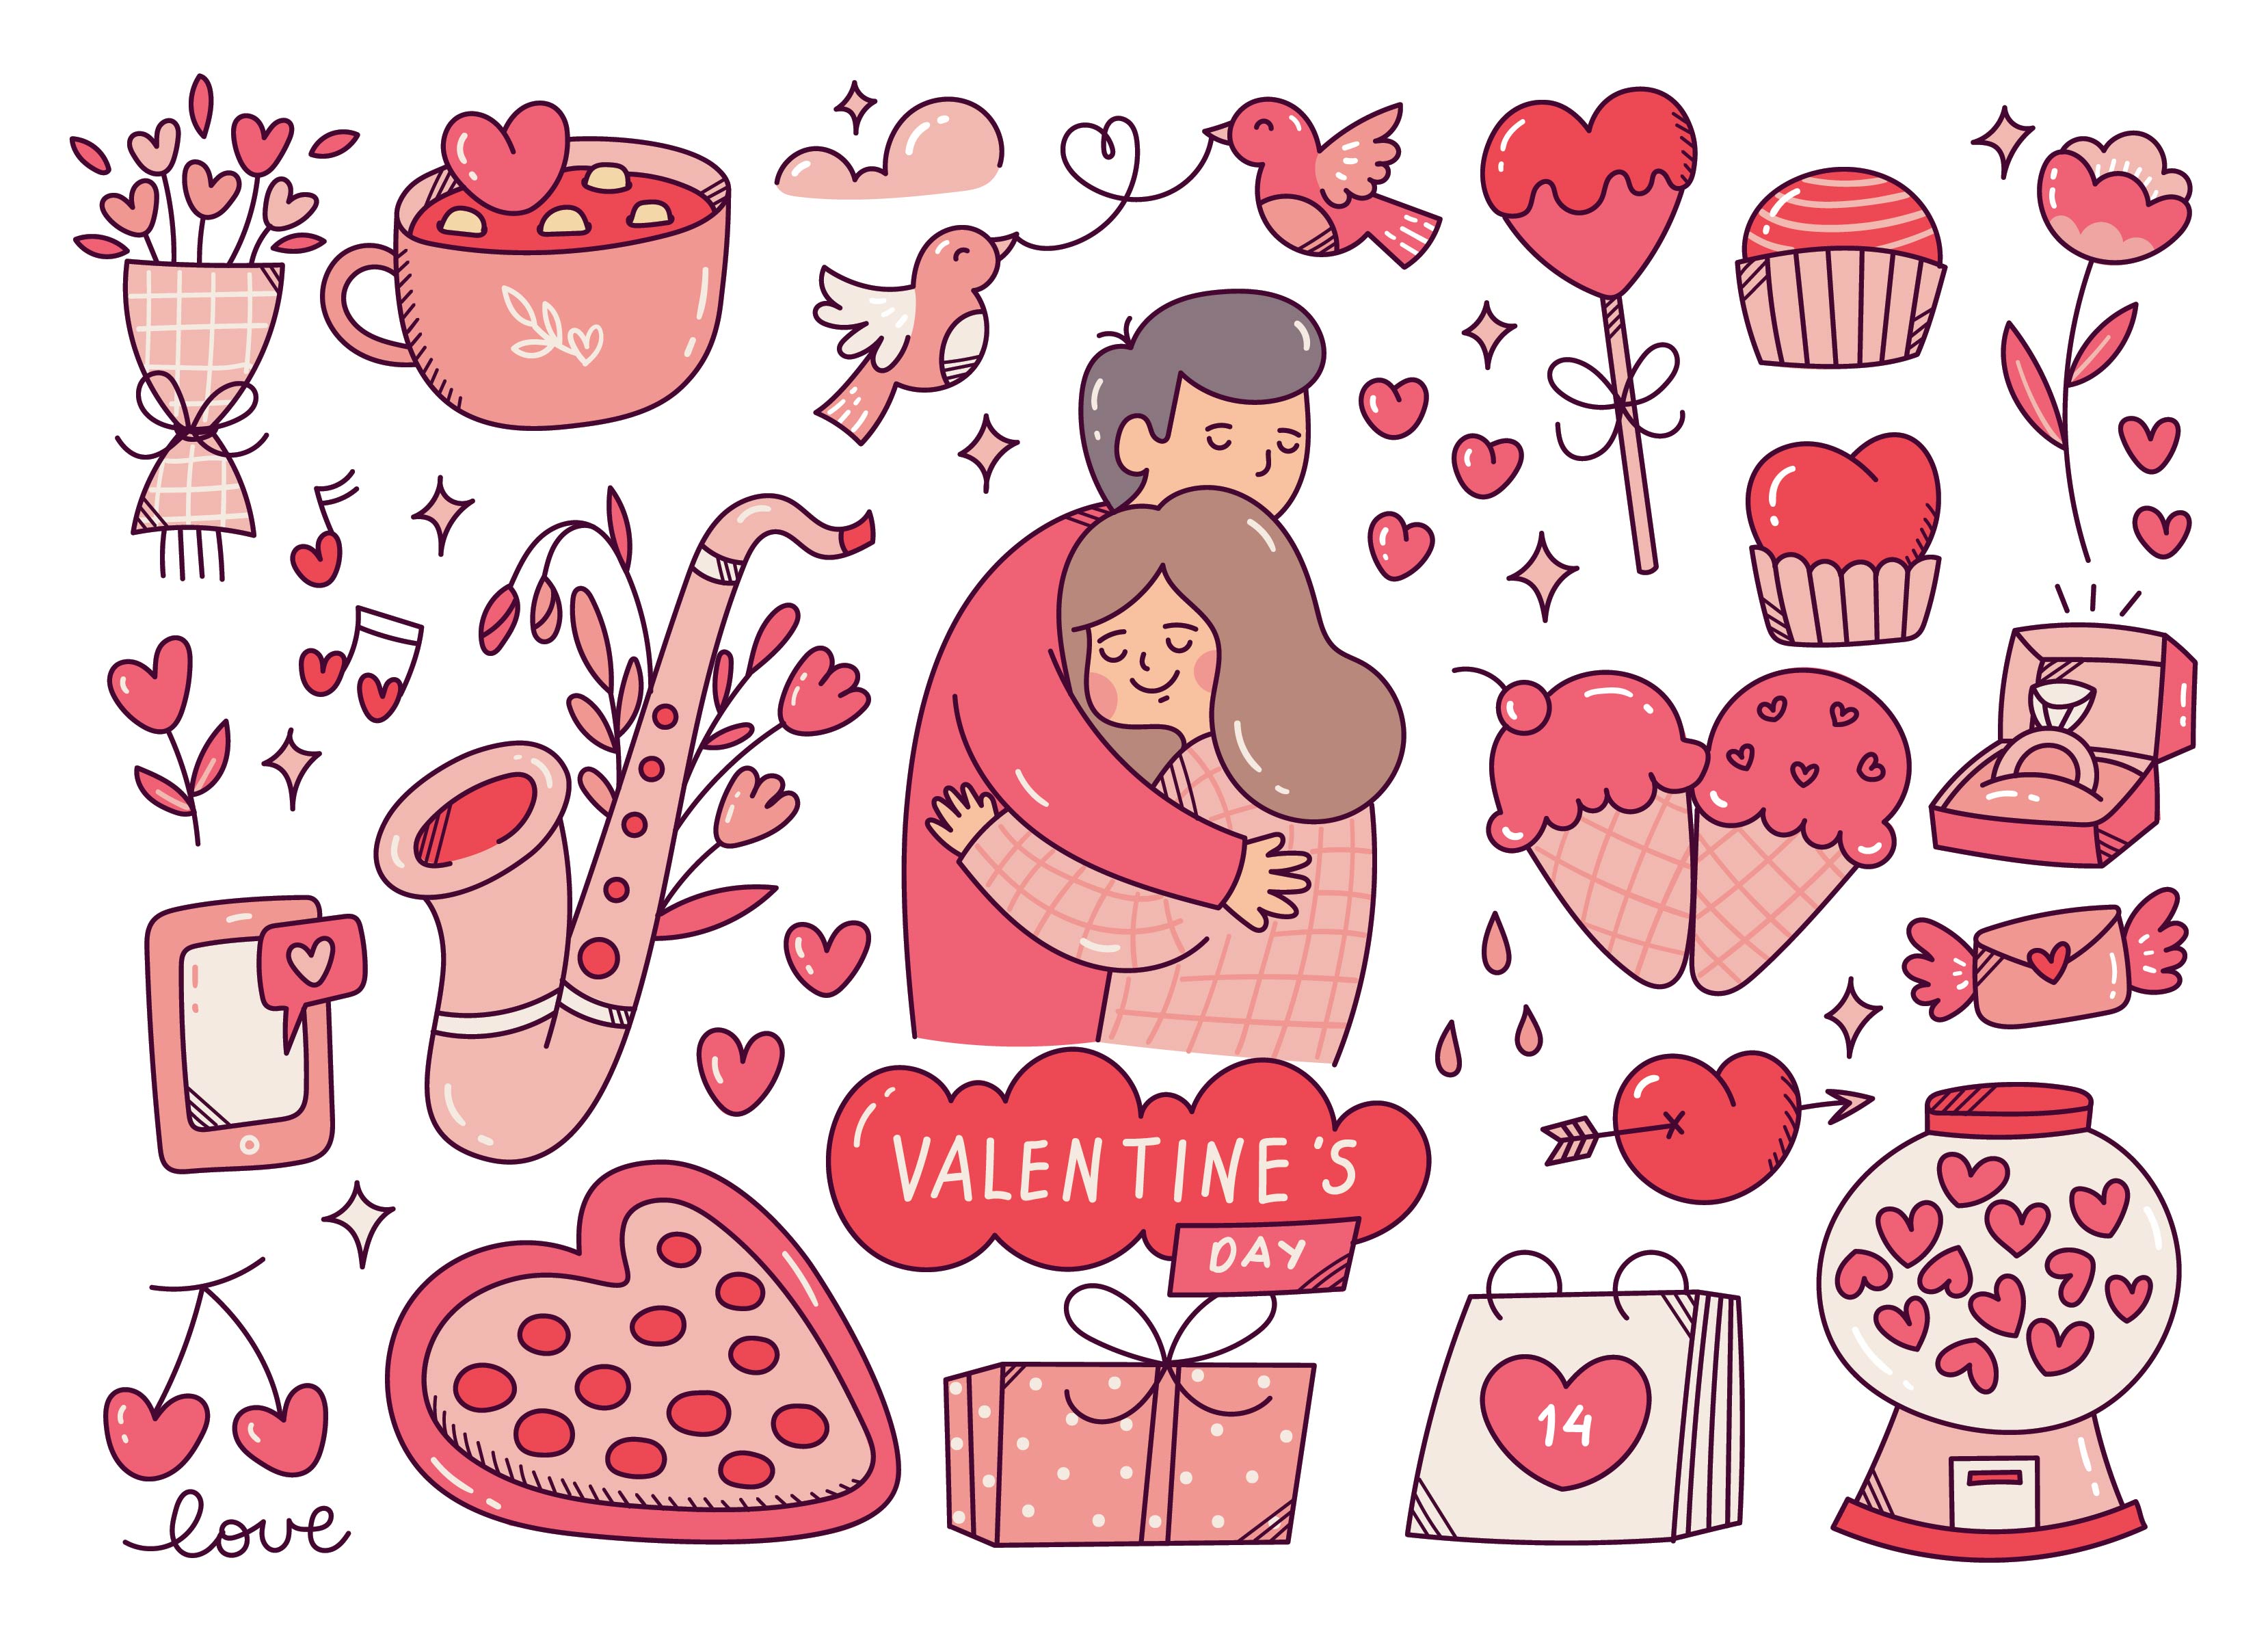 Set of Cute Valentine's Doodles Graphic by Big Barn Doodles · Creative